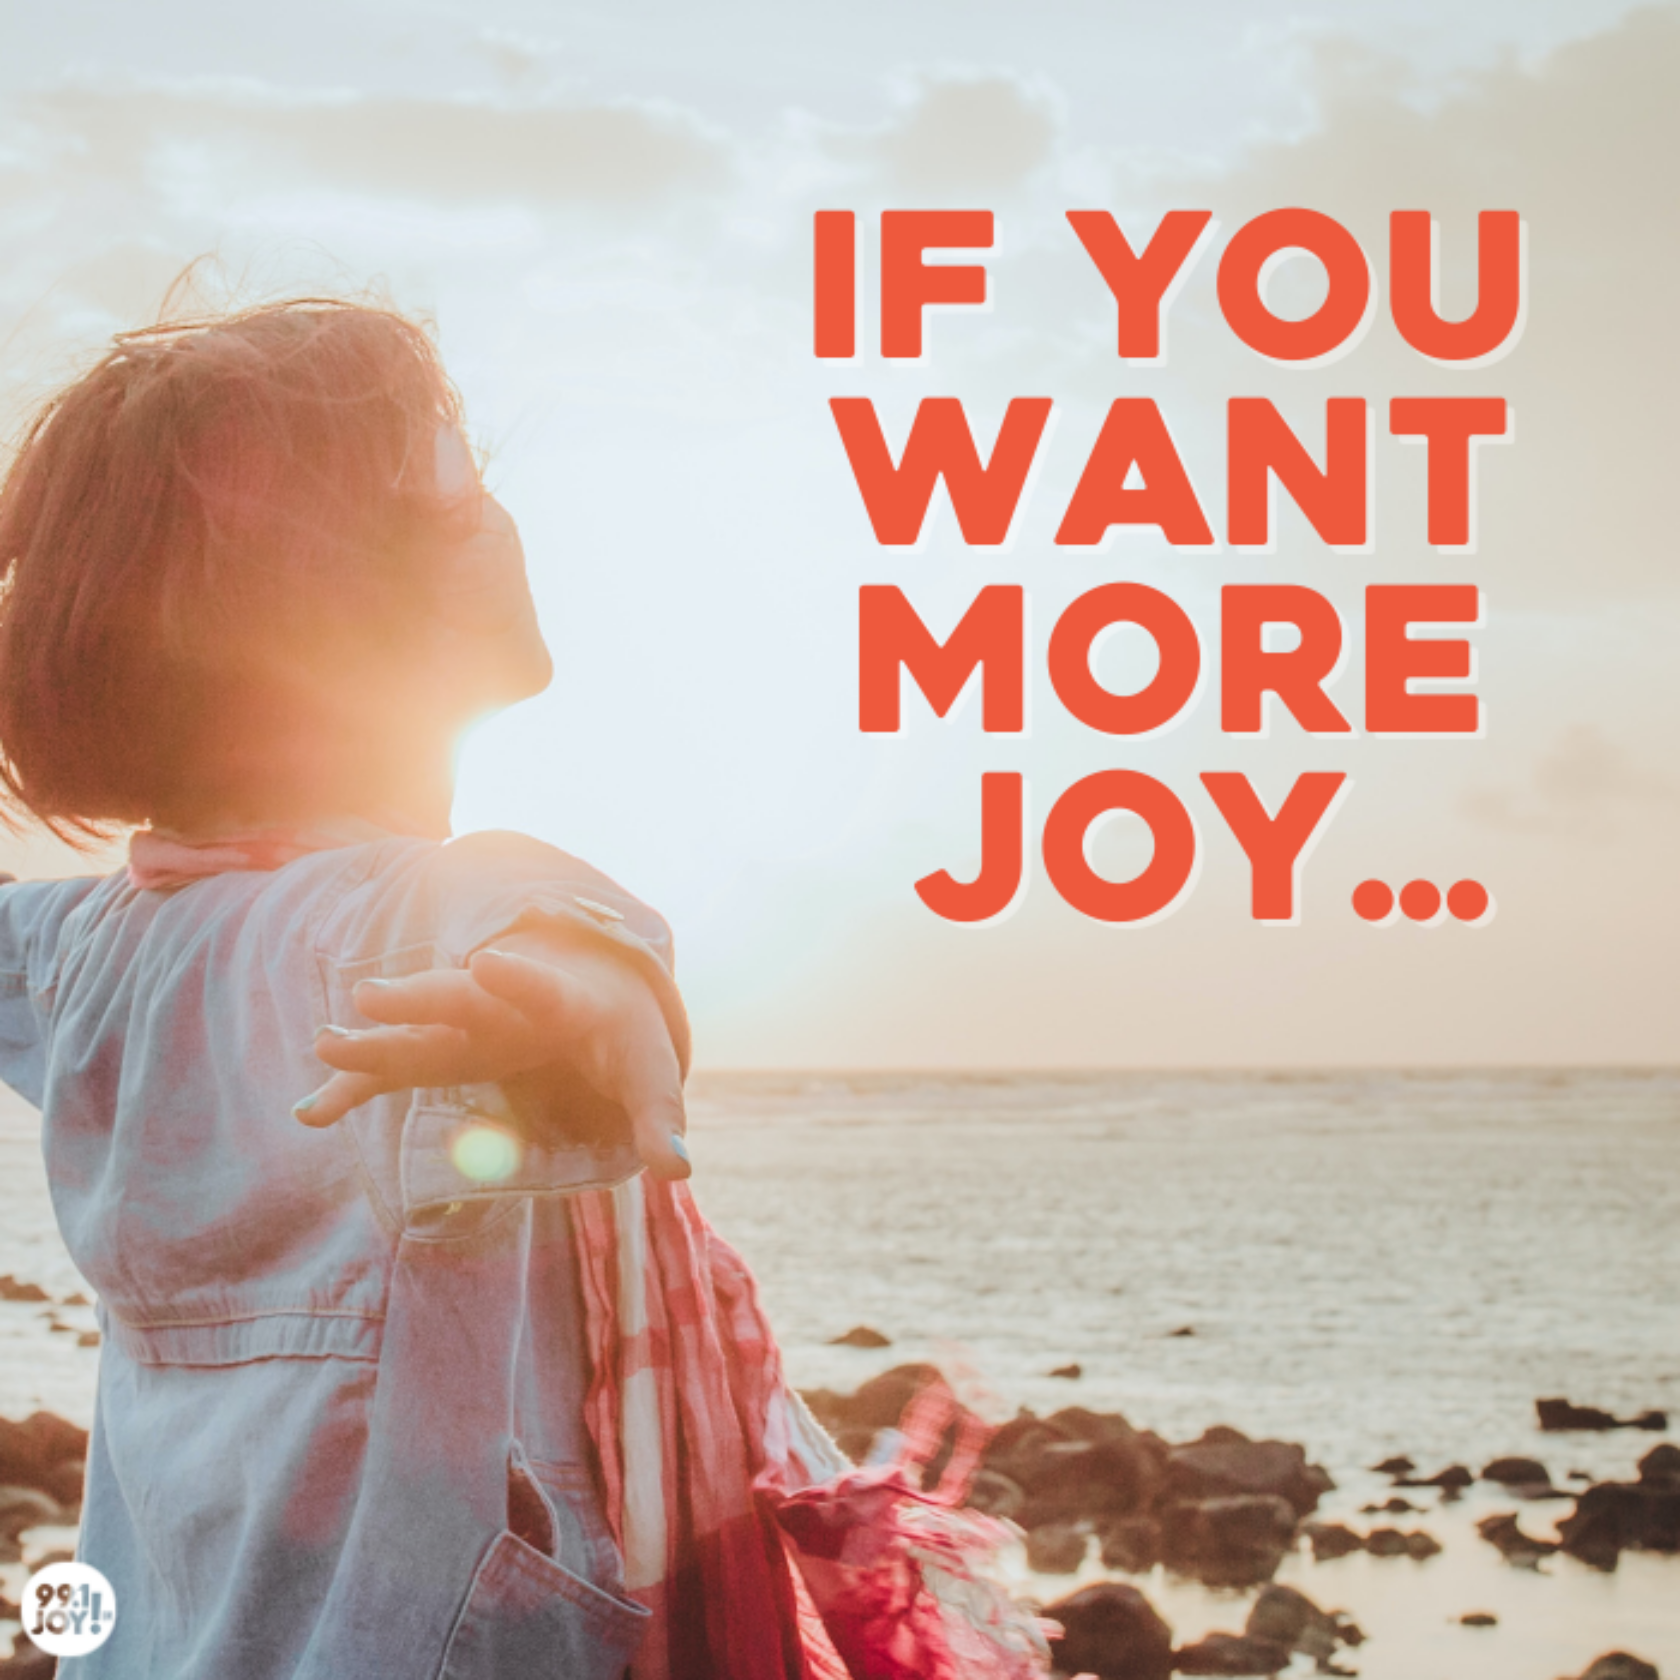 If You Want More Joy…